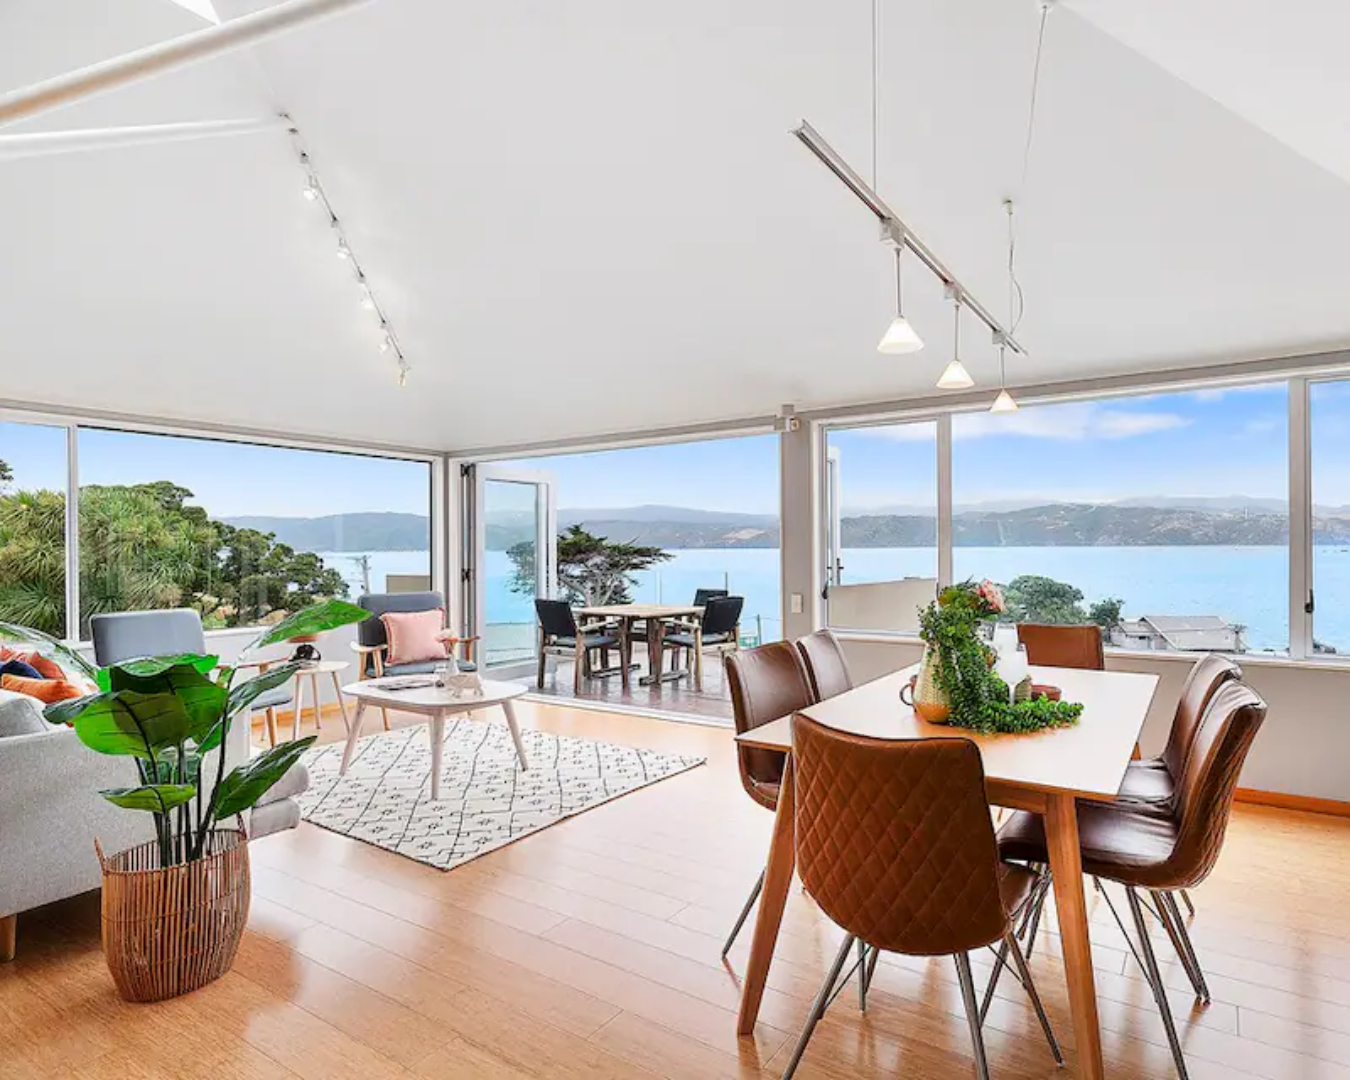 A shot of the gorgeous, open living and dining area at the Beachstay in Seatoun, including its sweeping ocean views